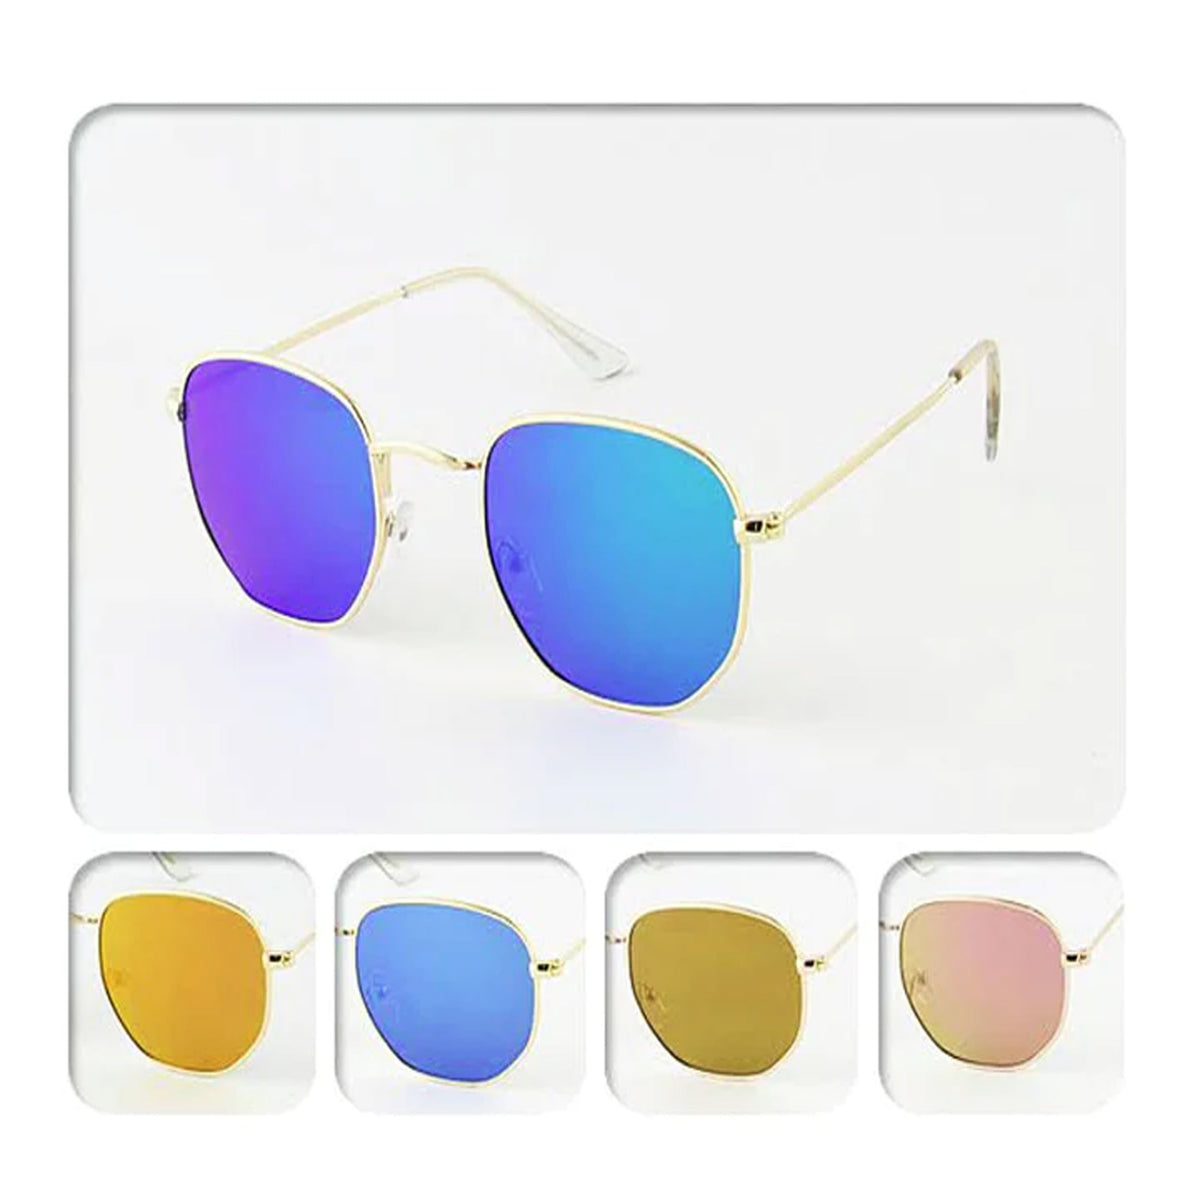 Mirror Lenses Sunglasses -(Sold By DZ =$47.99)